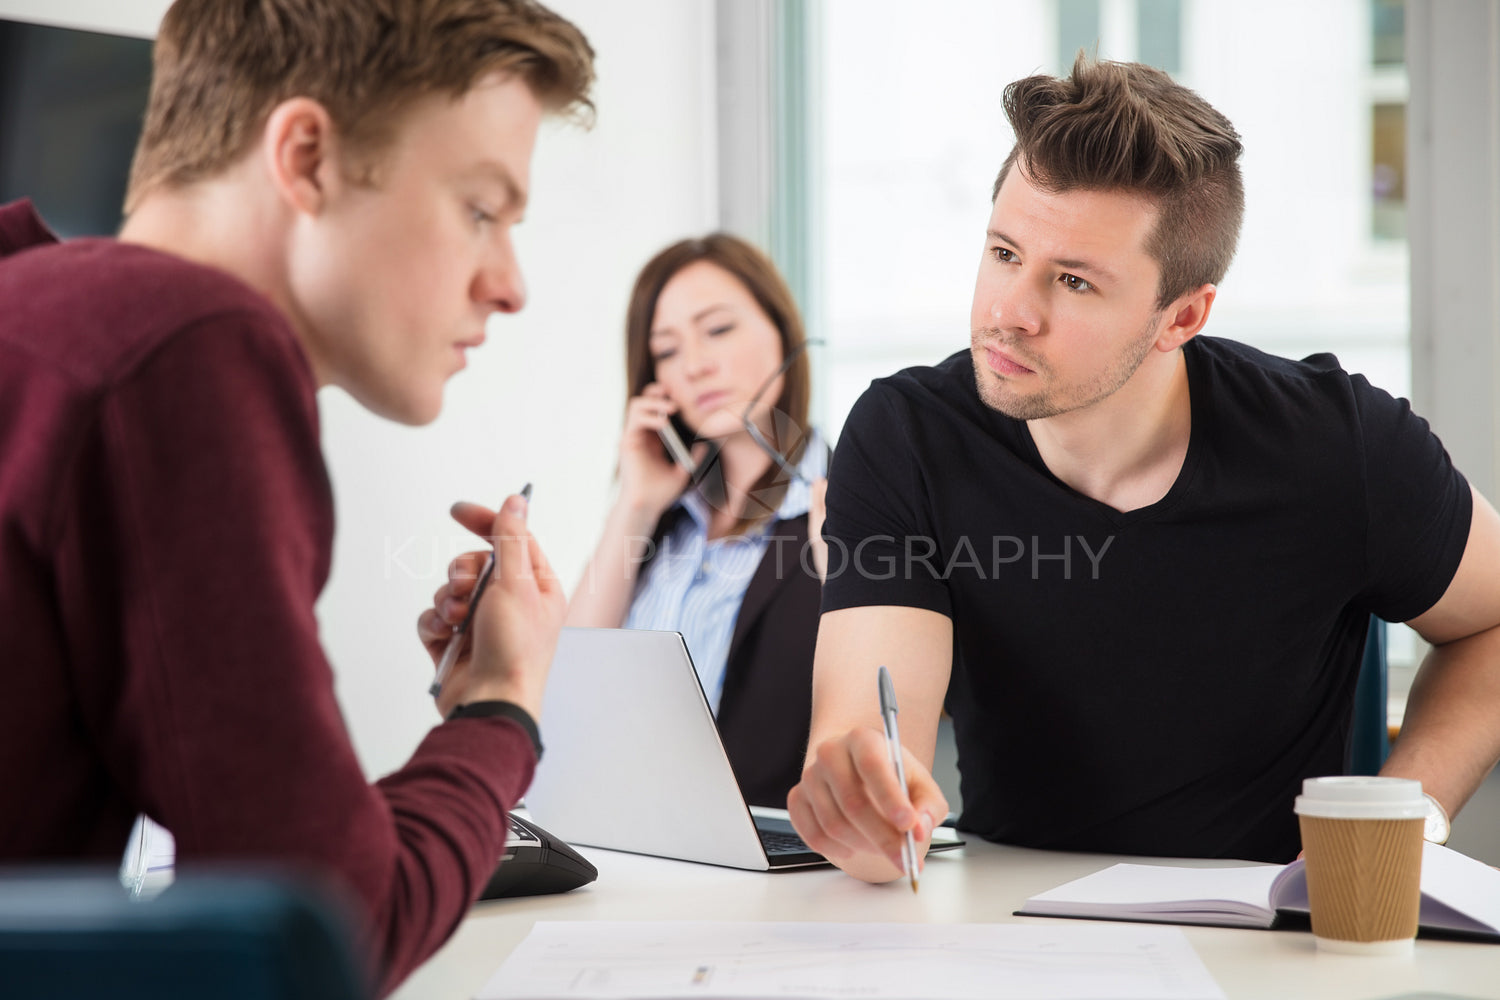 Professionals Planning While Colleague Using Mobile Phone In Off